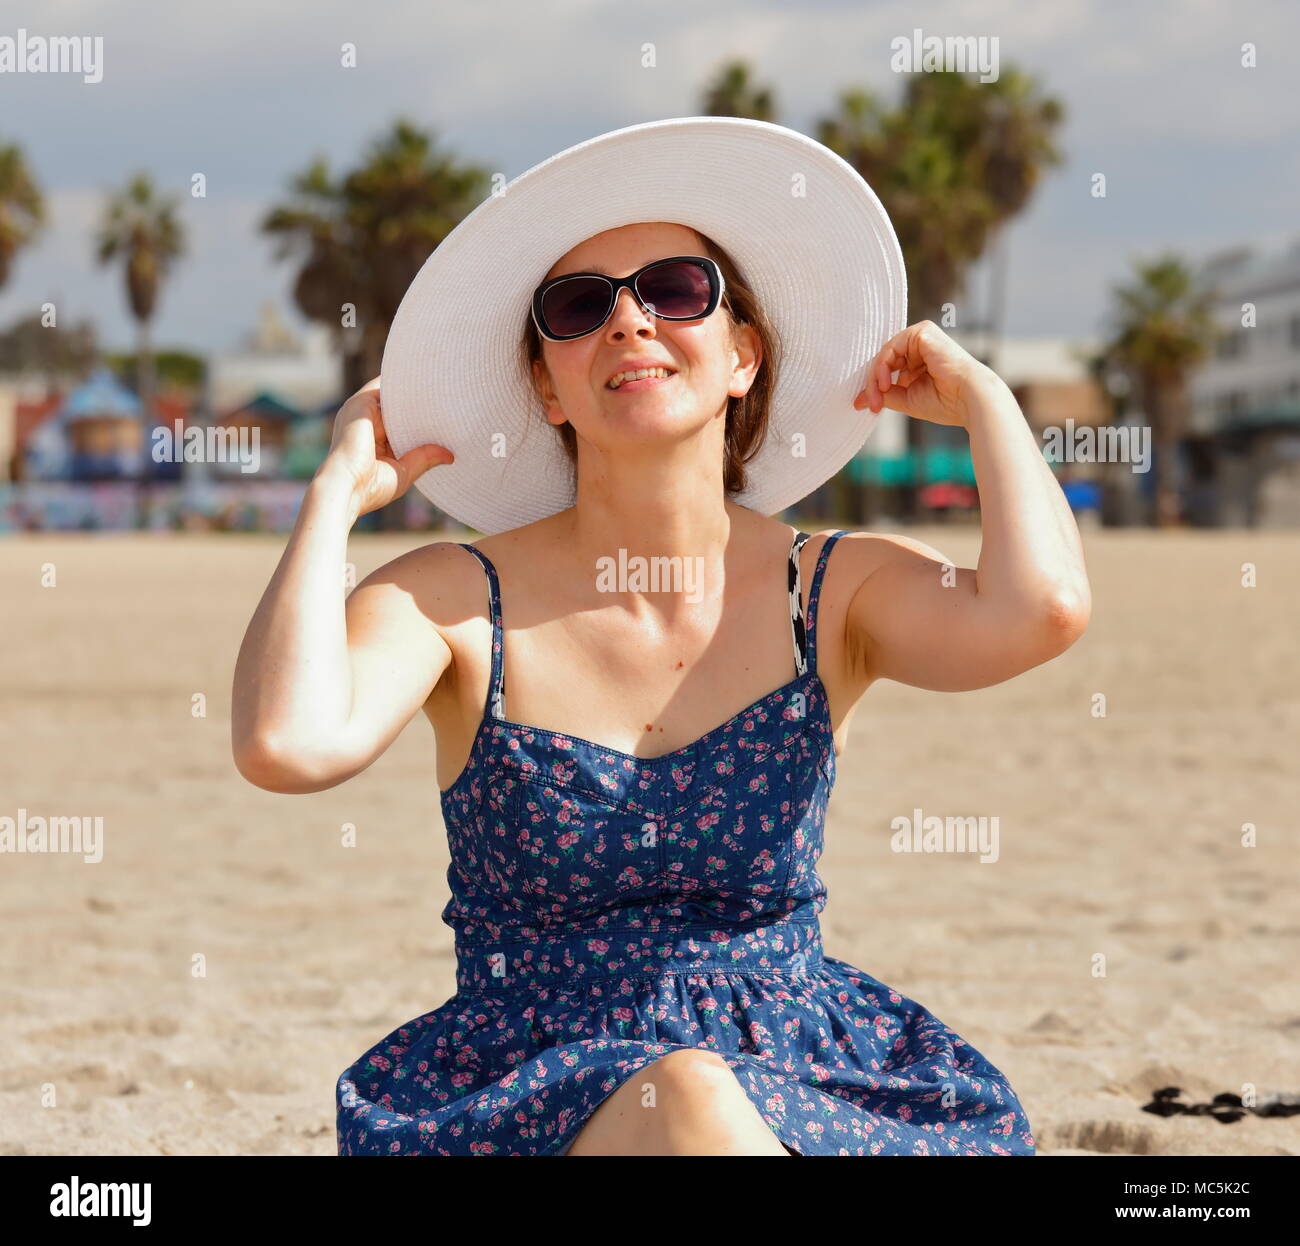 Young woman in white sunhat, sunglasses, and blue sundress. She is holding the brim of her sunhat and has her head tilted slightly upwards Stock Photo